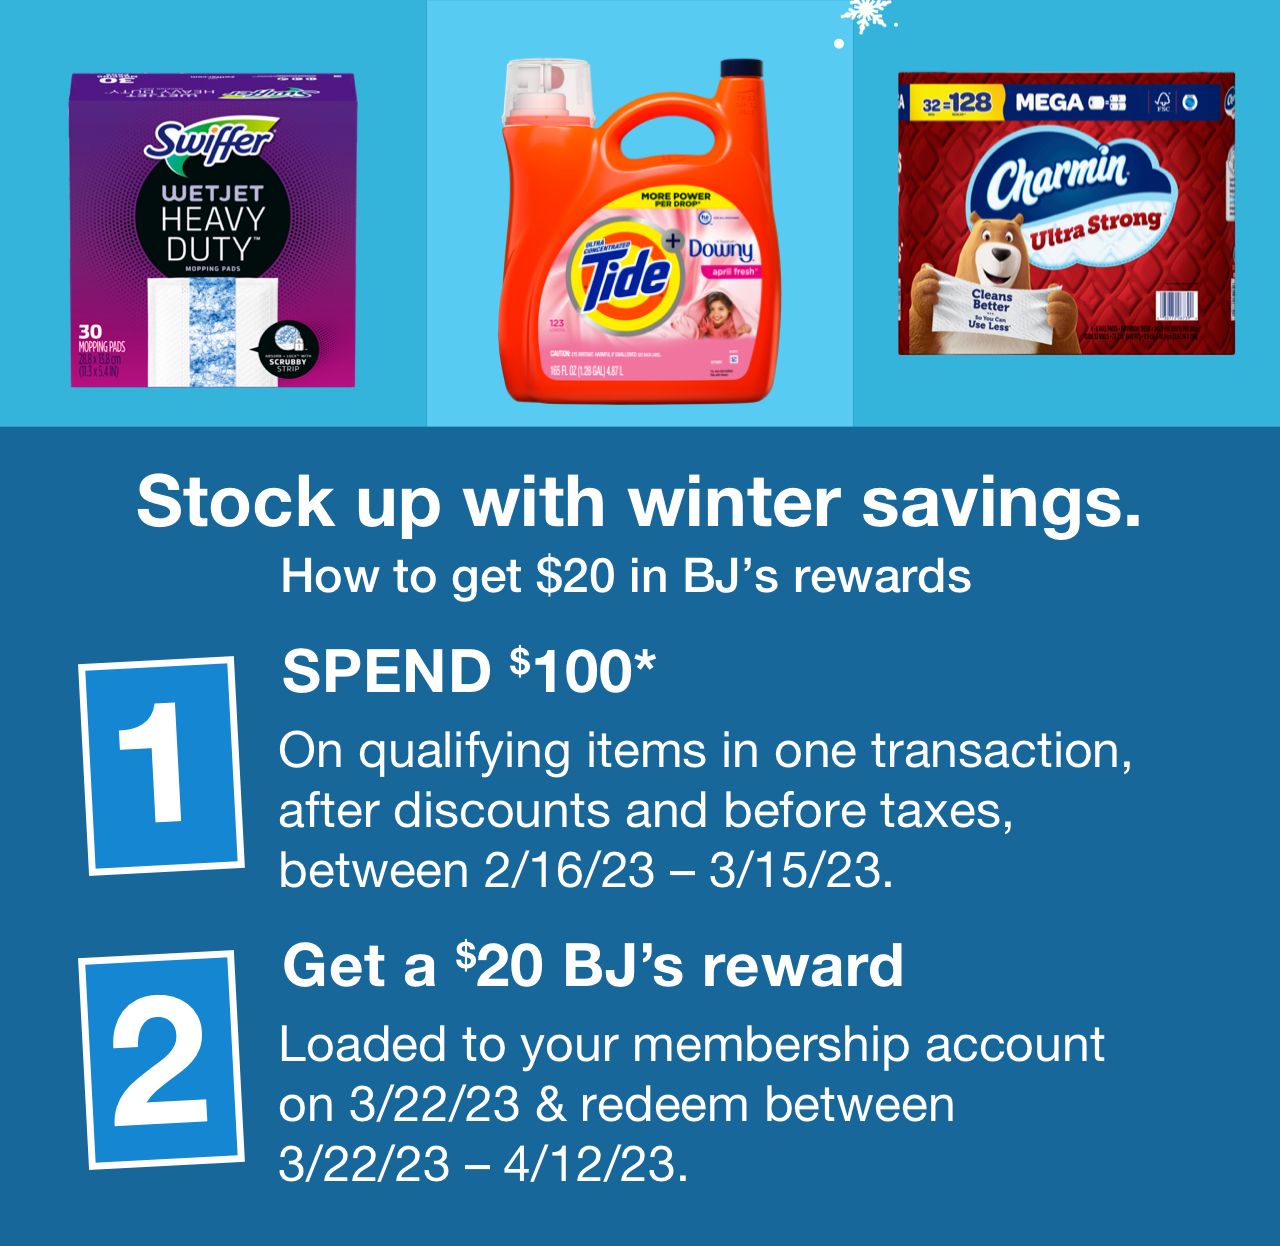 Stock up with winter savings. How to get $20 in BJ’s rewards. Step one: Spend $100* on qualifying items in one transaction, after discounts and before taxes, between 2/16/23 – 3/15/23. Step two: Get a $20 BJ